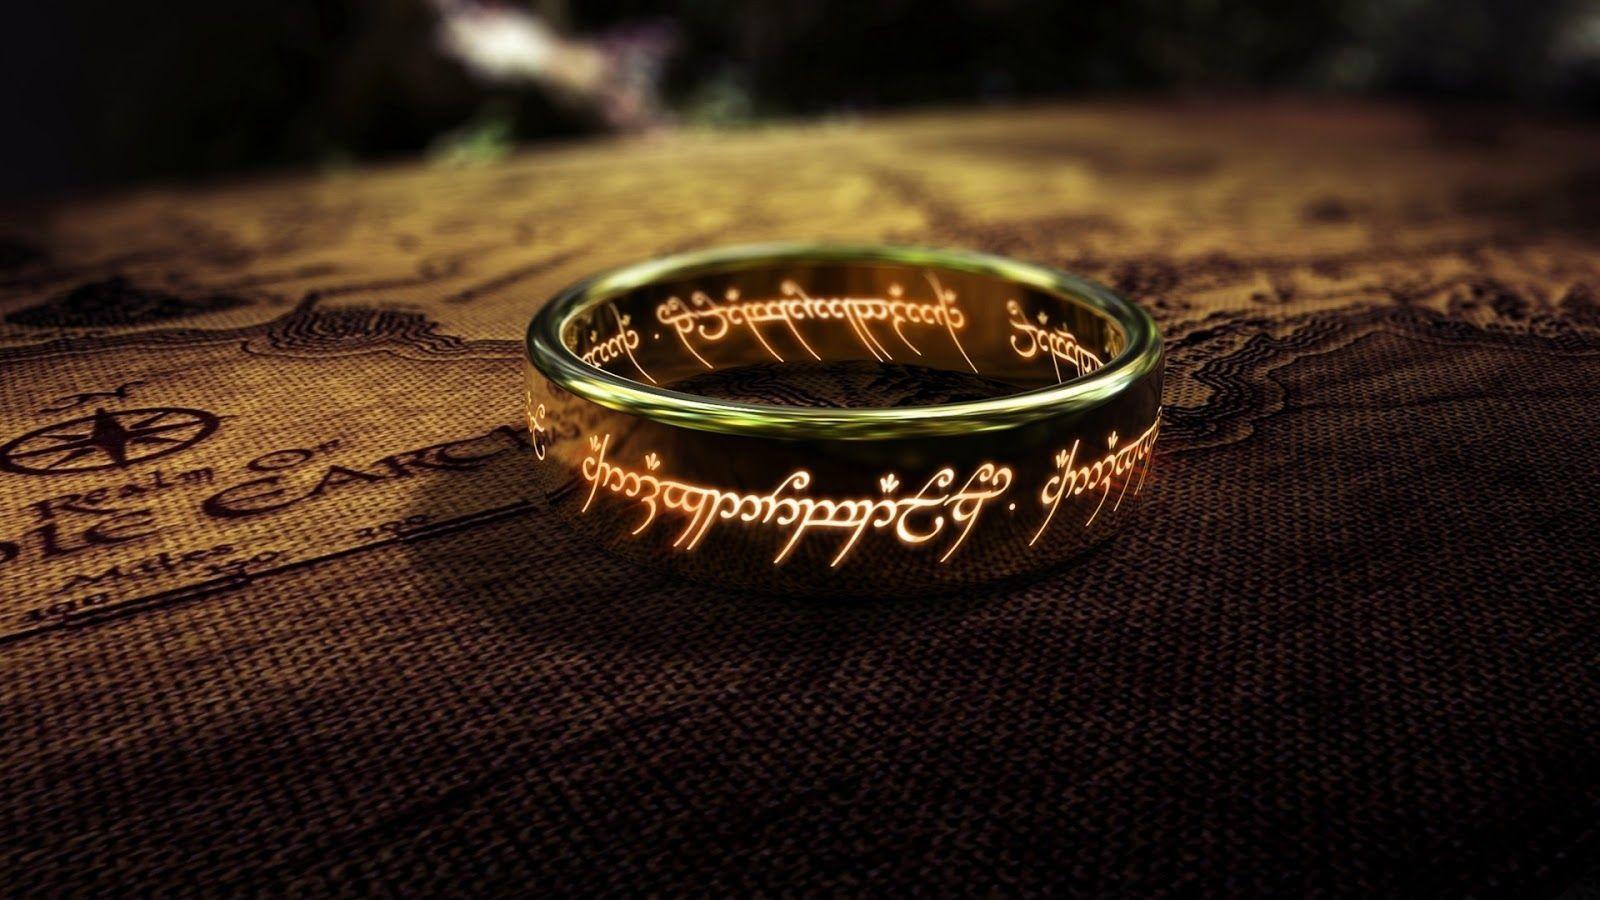 Free Download Lord The Rings One Ring HD Wallpaper Lowrider Car